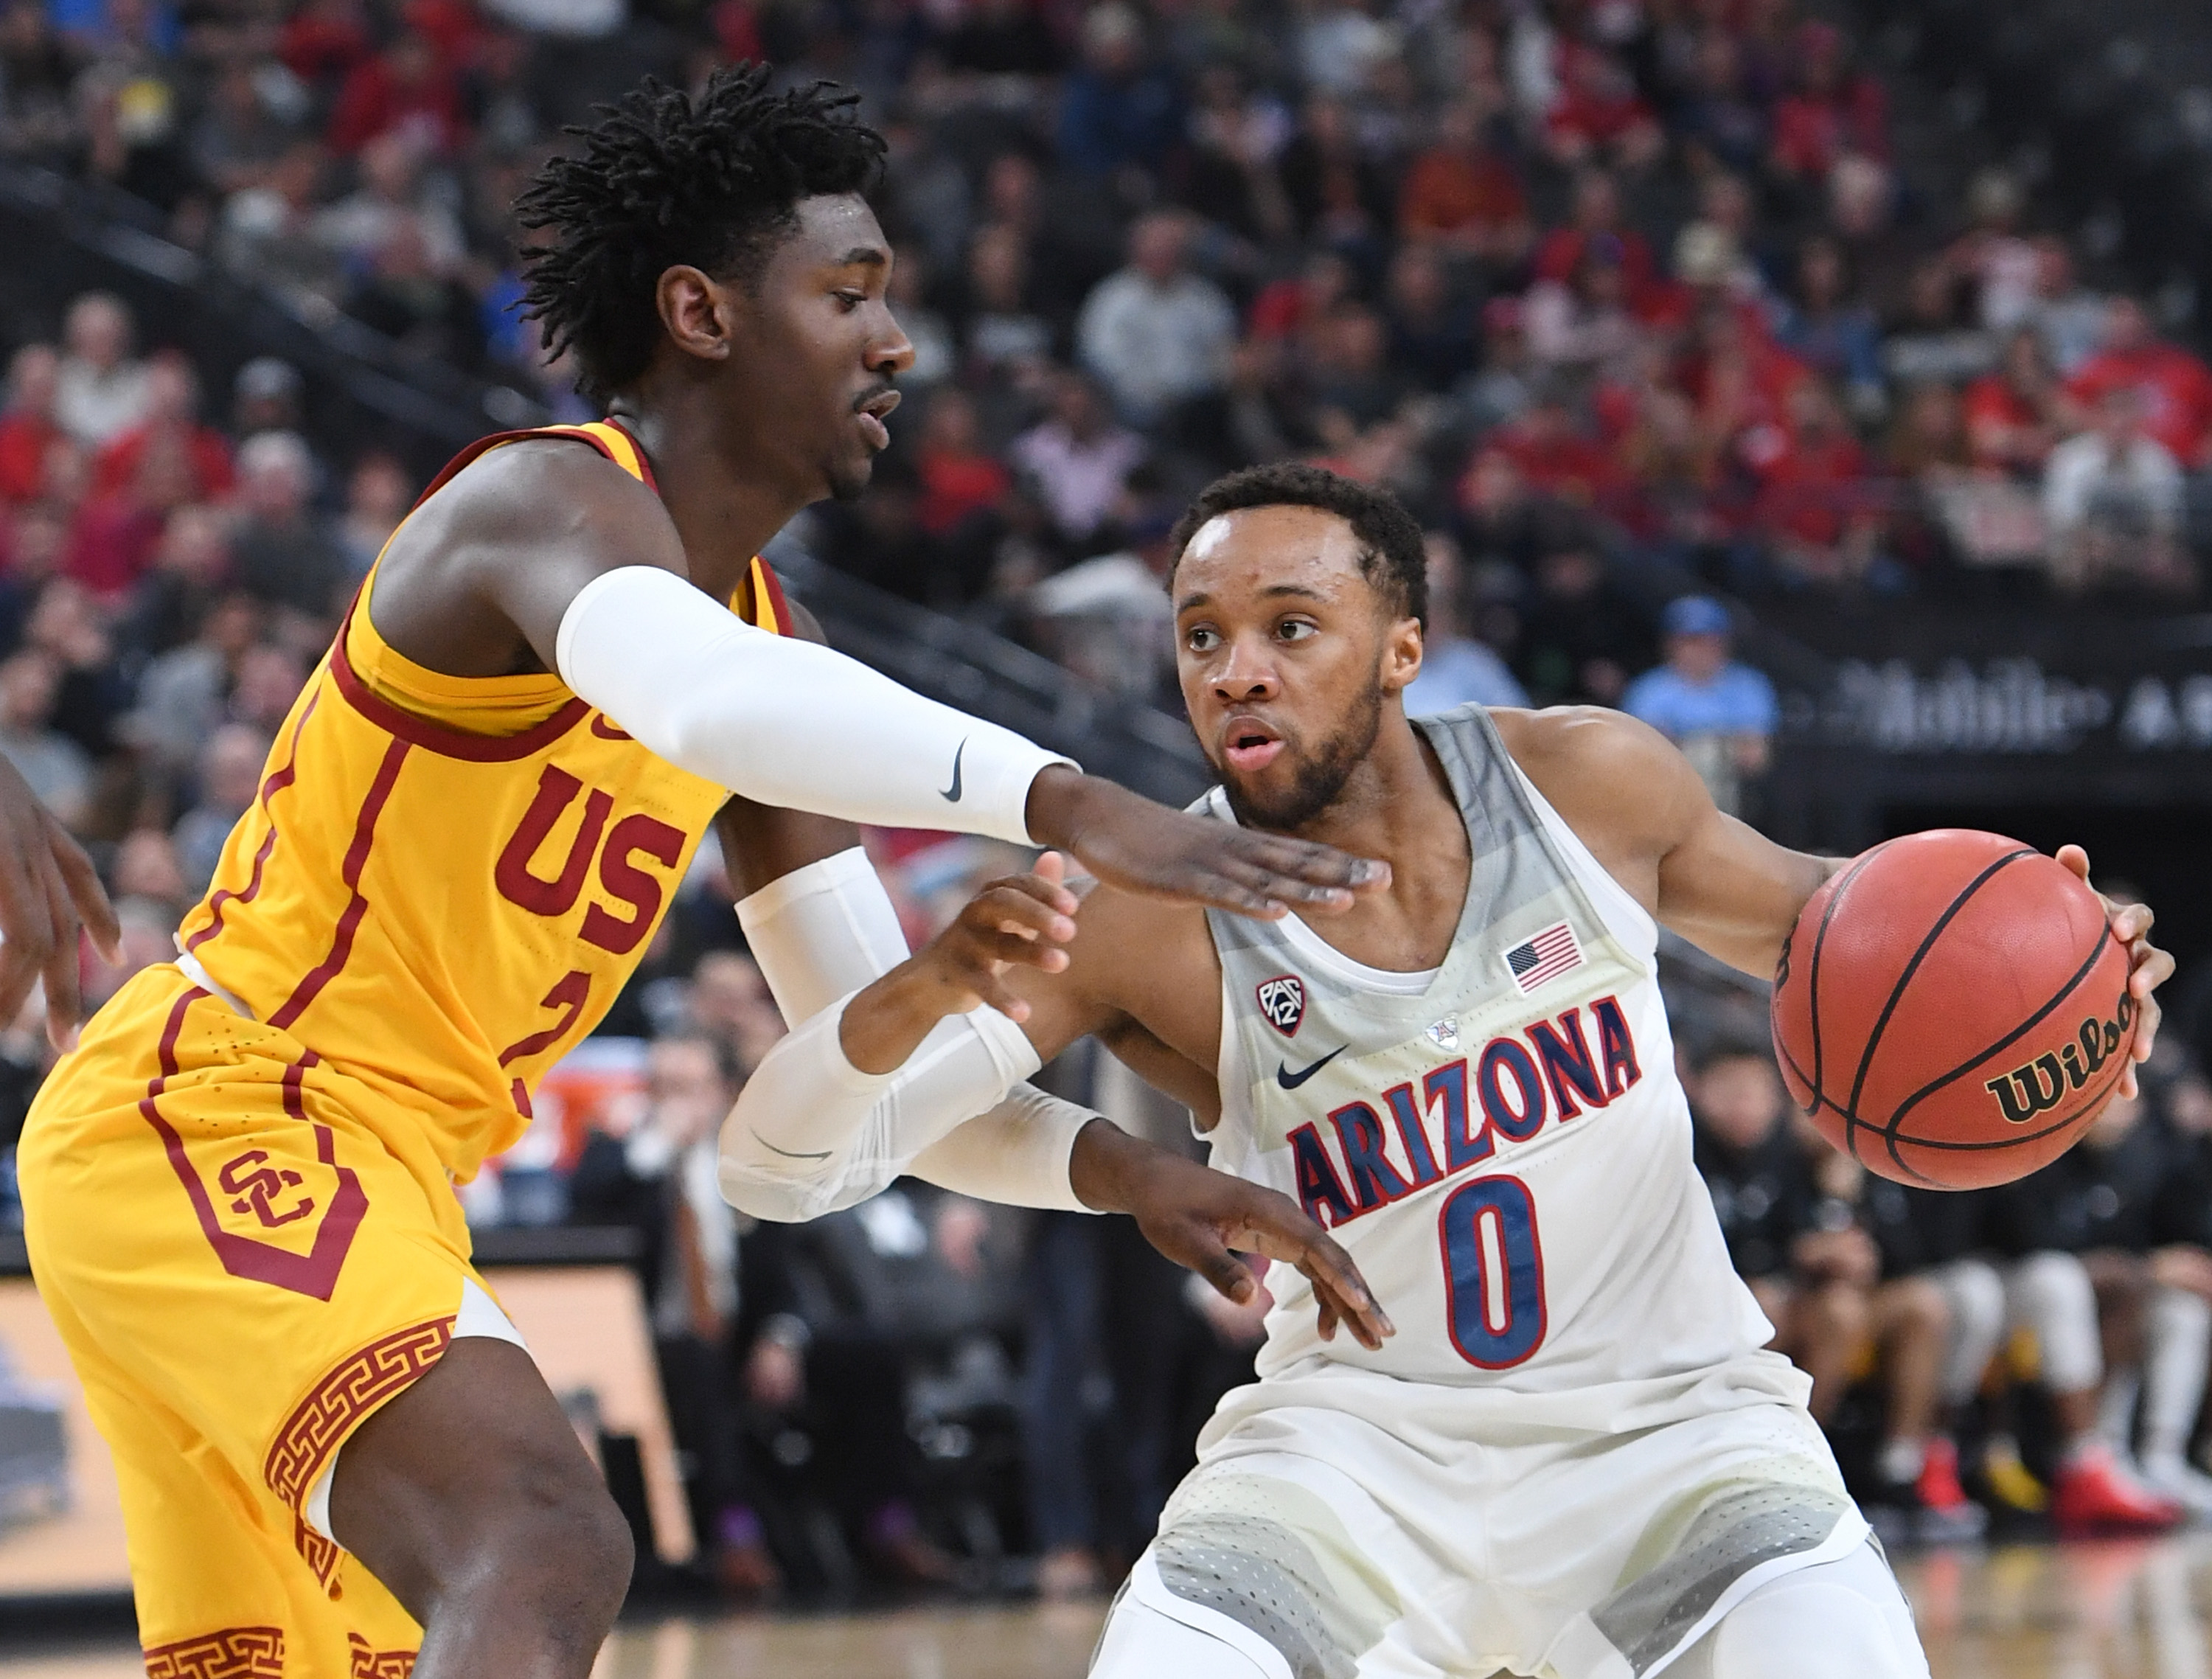 The Arizona Wildcats and USC Trojans play in the 2018 March Madness tournament.